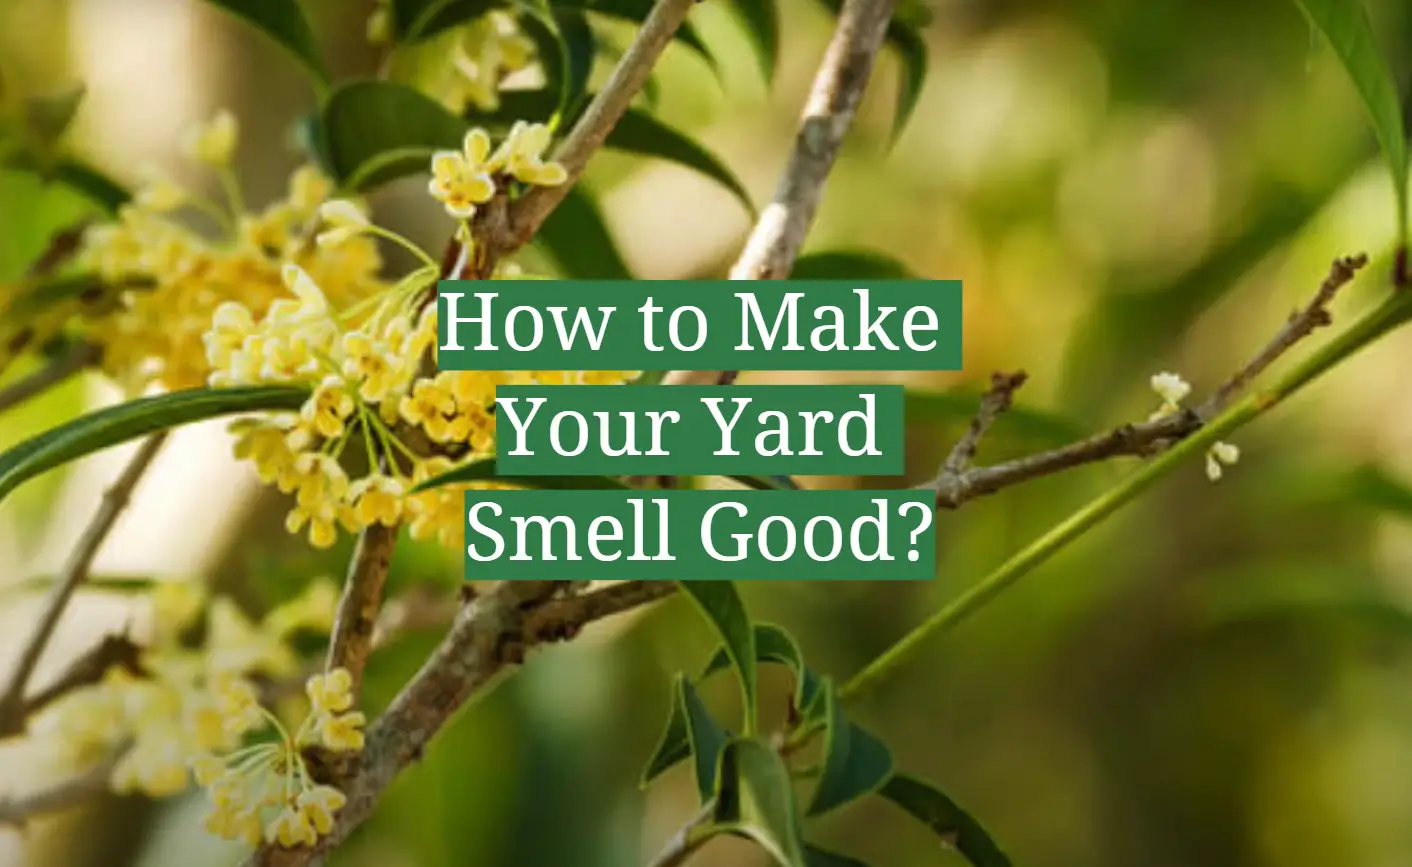 How to Make Your Yard Smell Good?